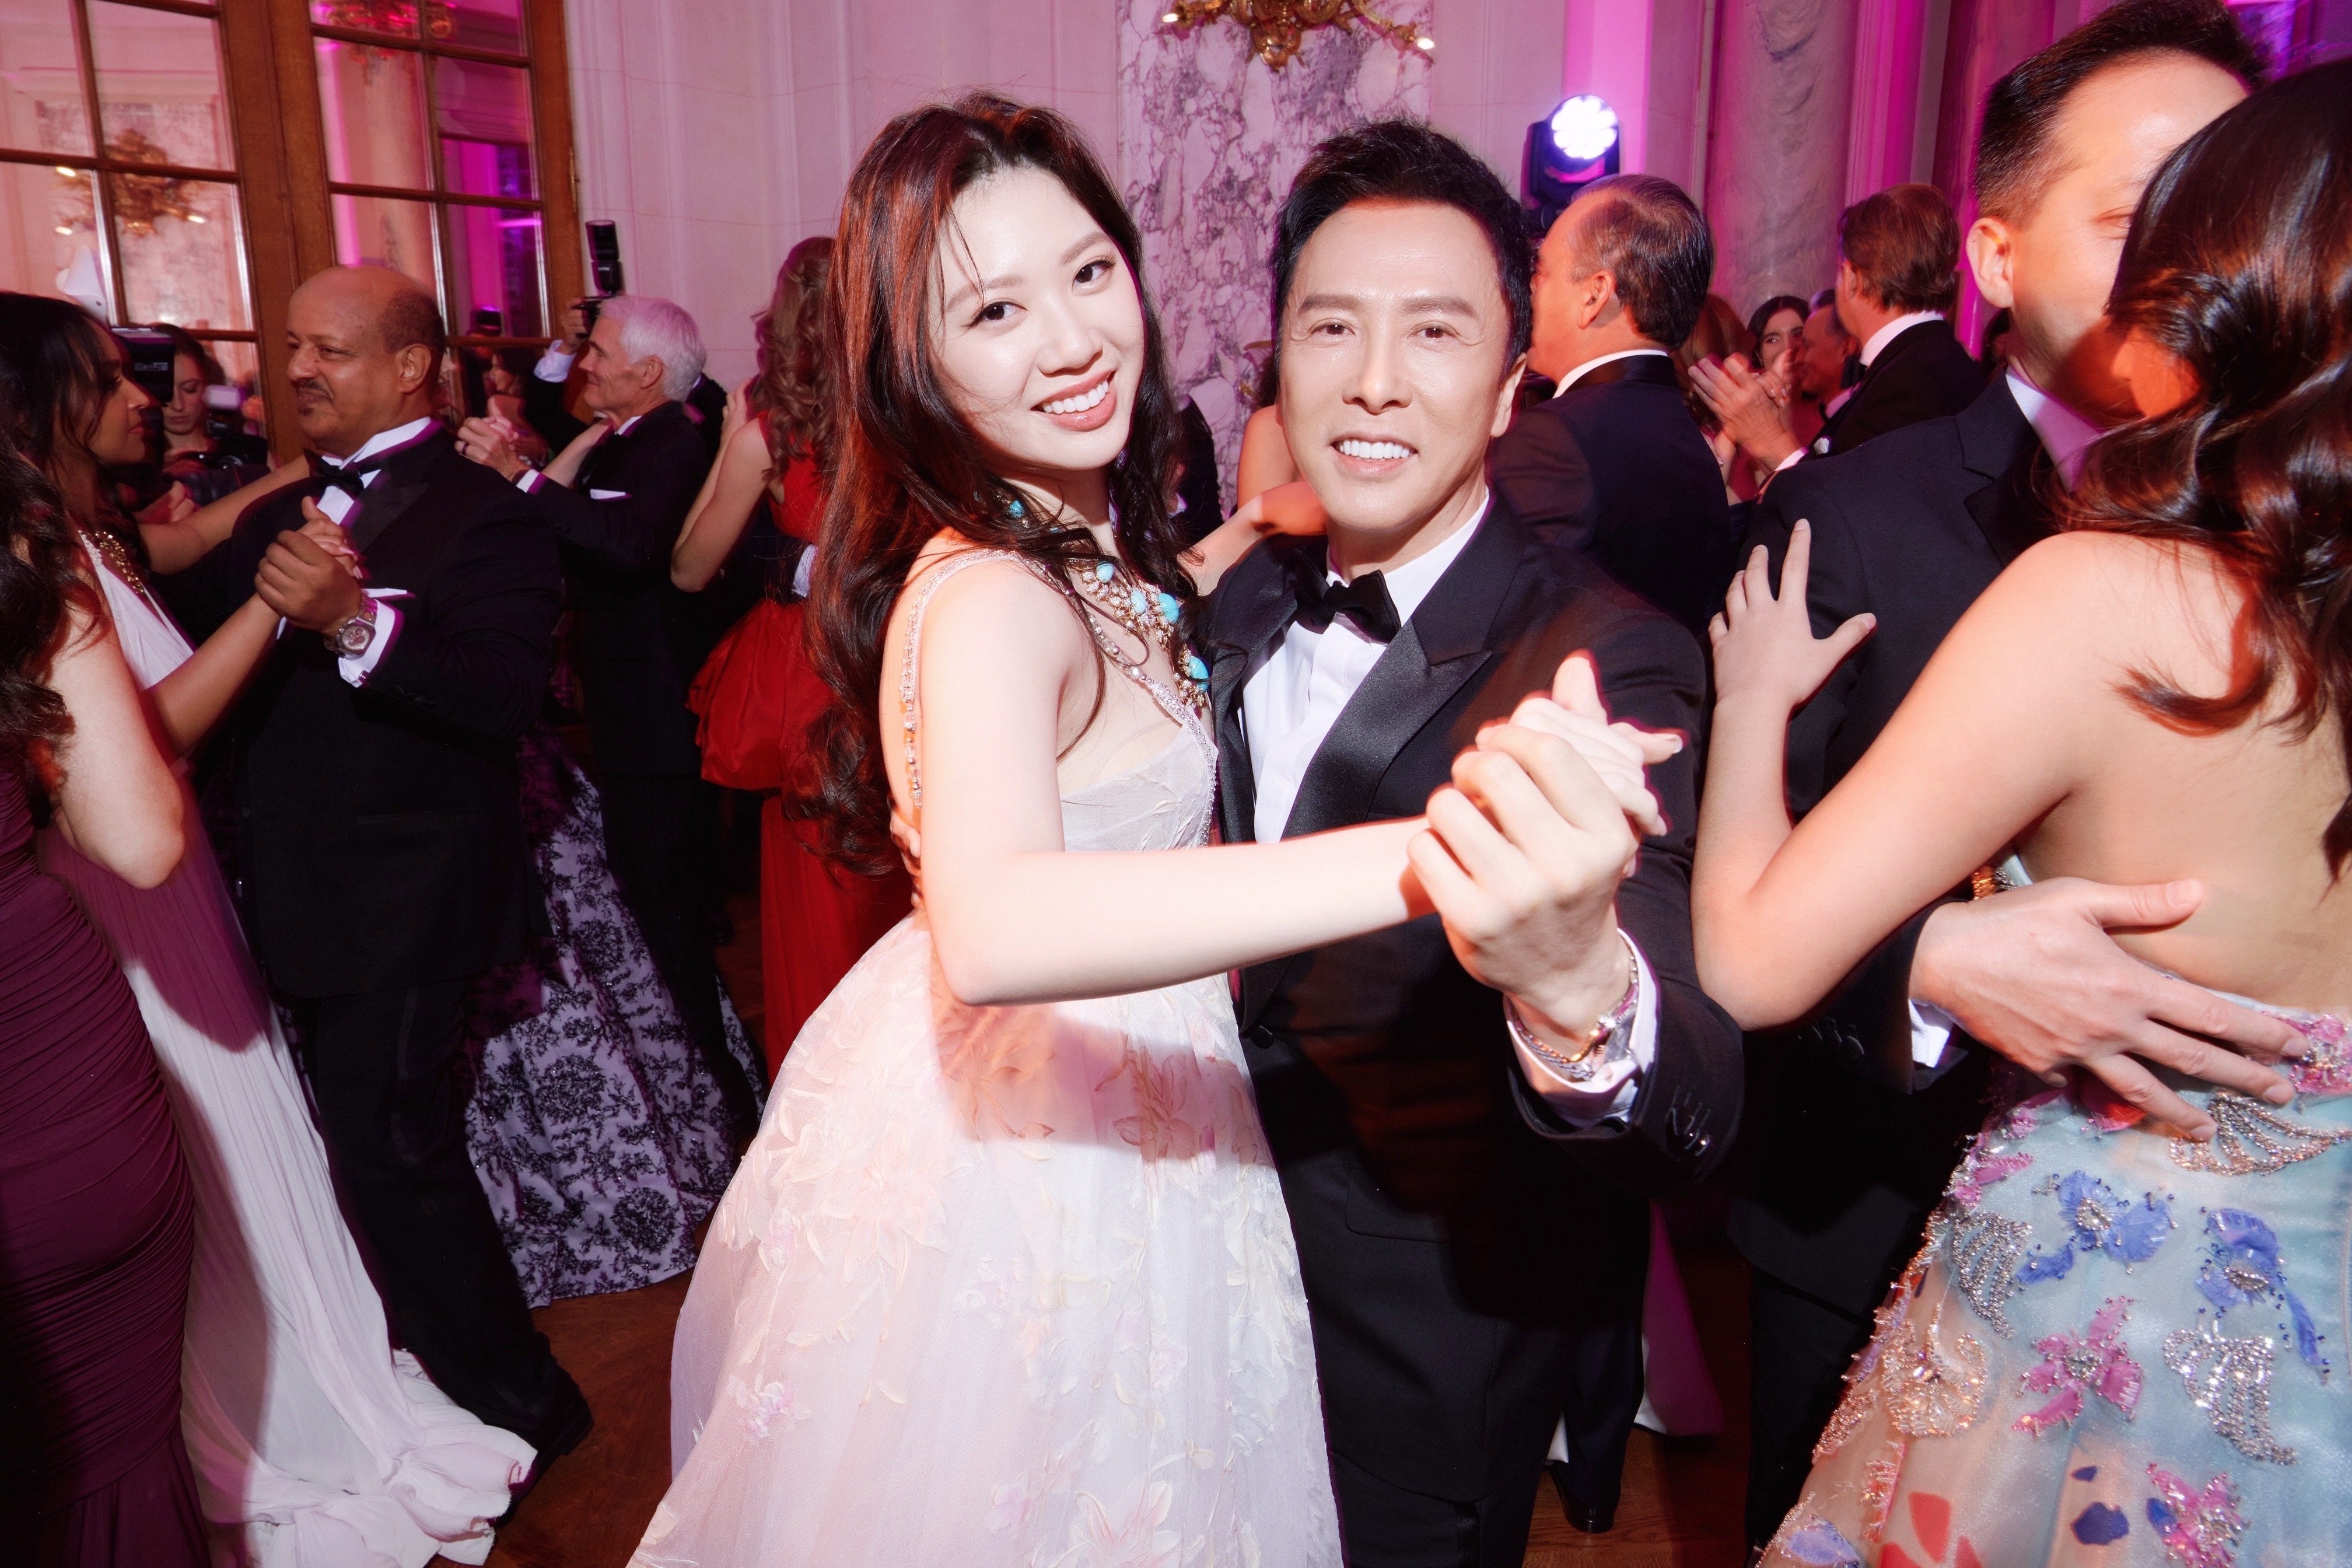 Jasmine Yen dances with her father Donnie Yen at the Bal des Débutantes in Paris, an event also attended by Hong Kong scions Skye Wong and Yvette Yao. Photos: Handouts